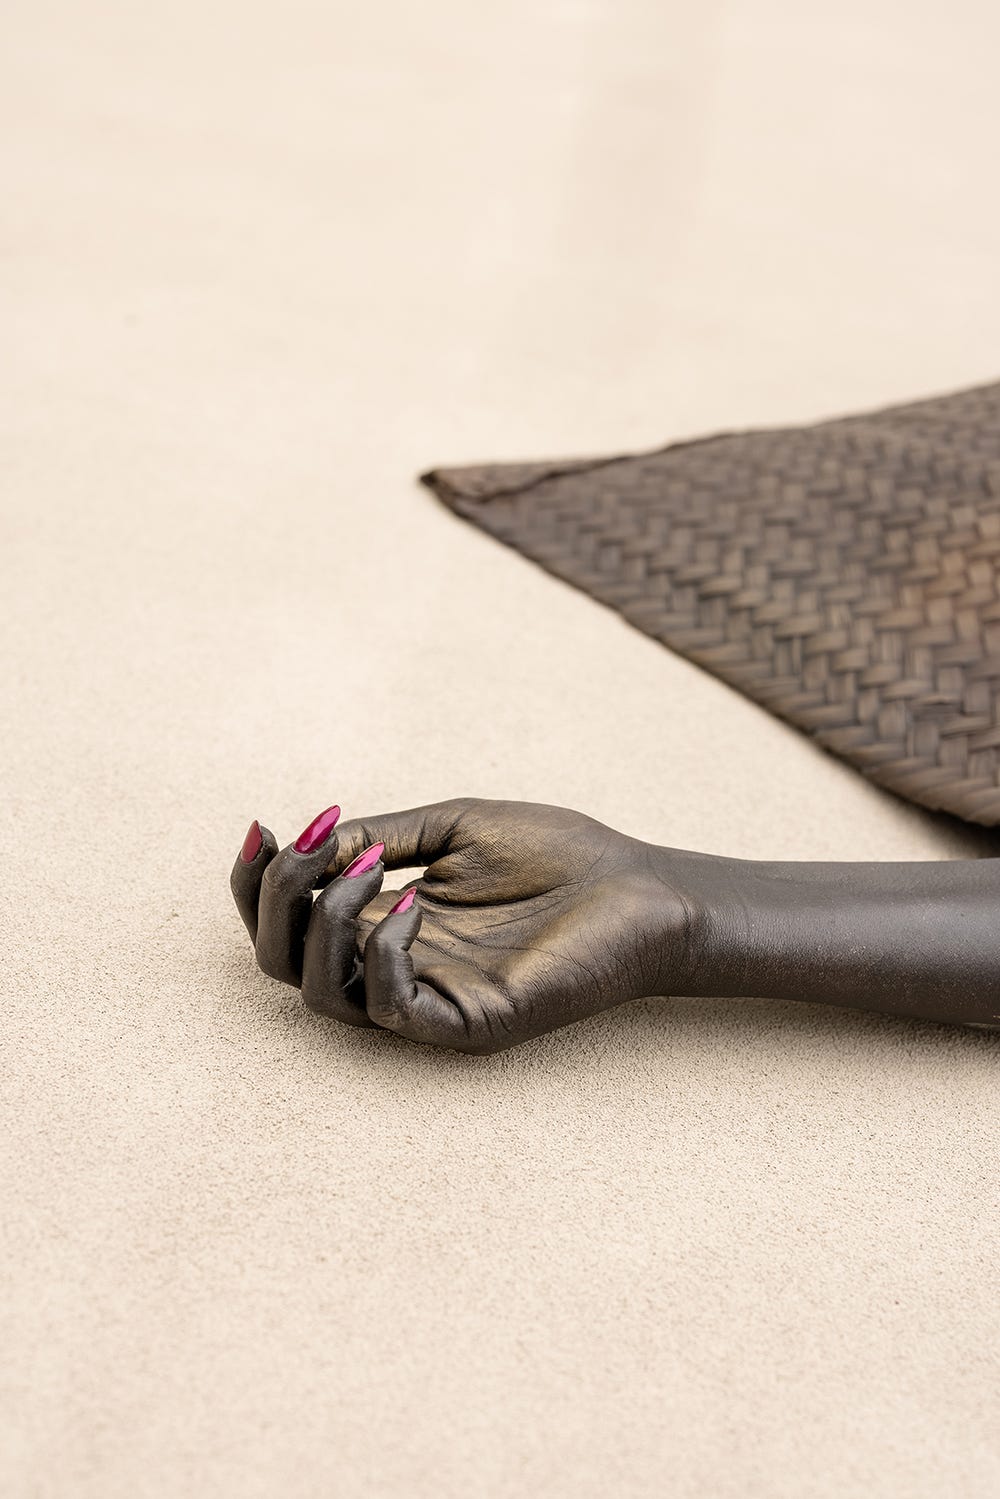 close up of a sculpture's hand with nail polish on the ground